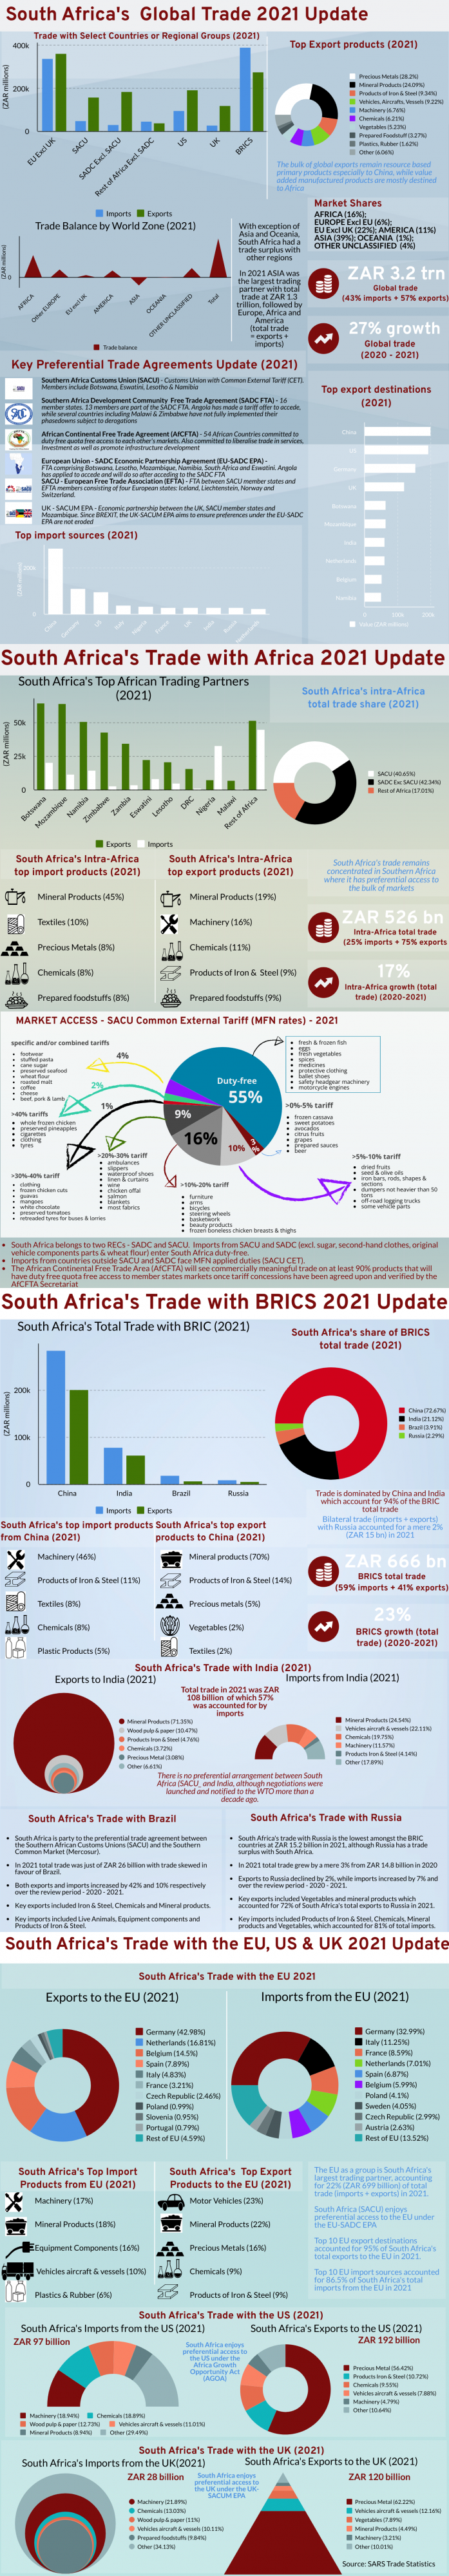 South Africa’s Global Trade 2021 Update